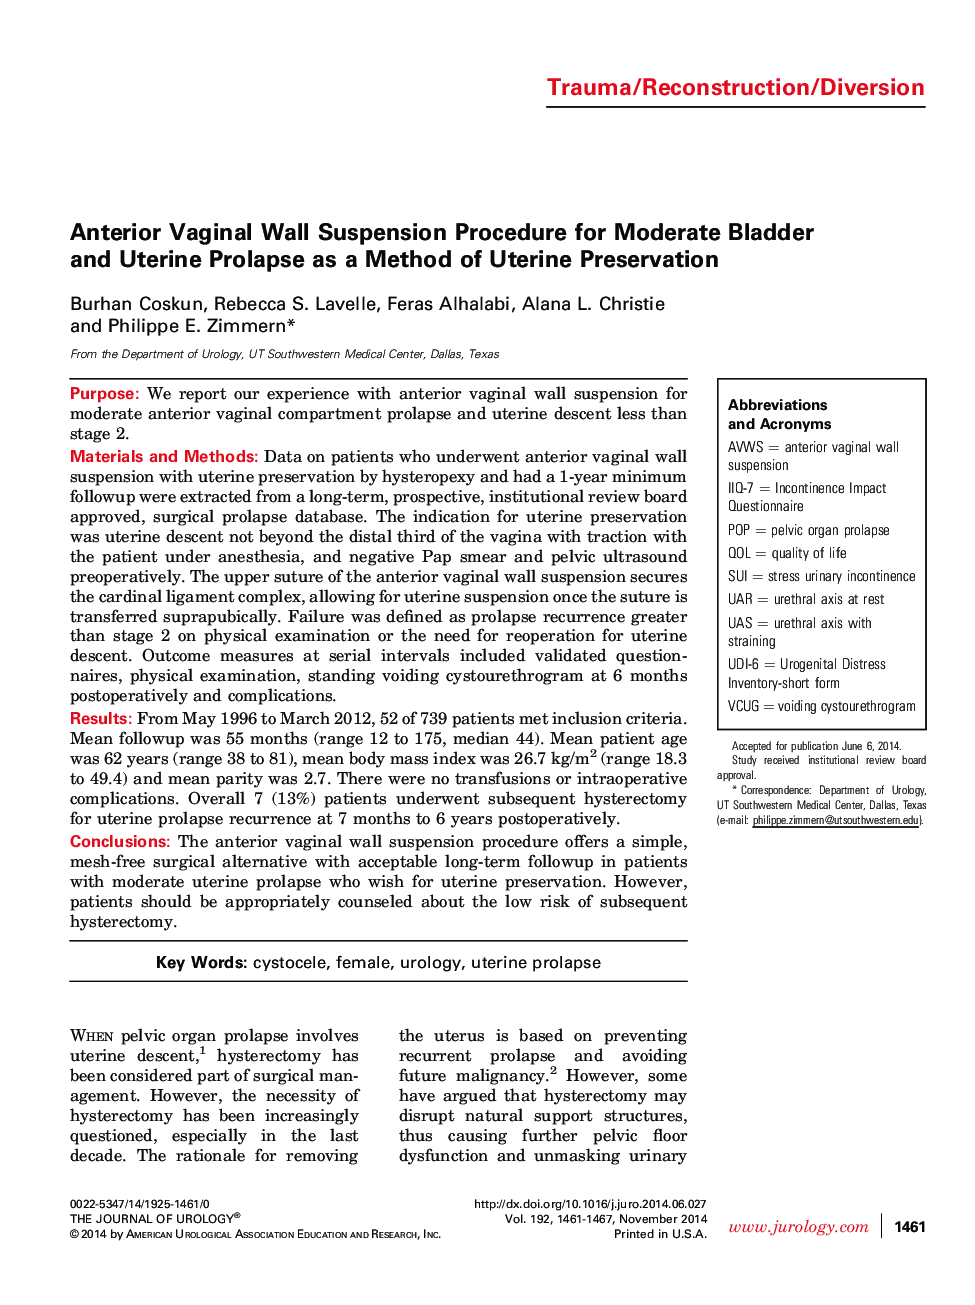 Anterior Vaginal Wall Suspension Procedure for Moderate Bladder and Uterine Prolapse as a Method of Uterine Preservation 